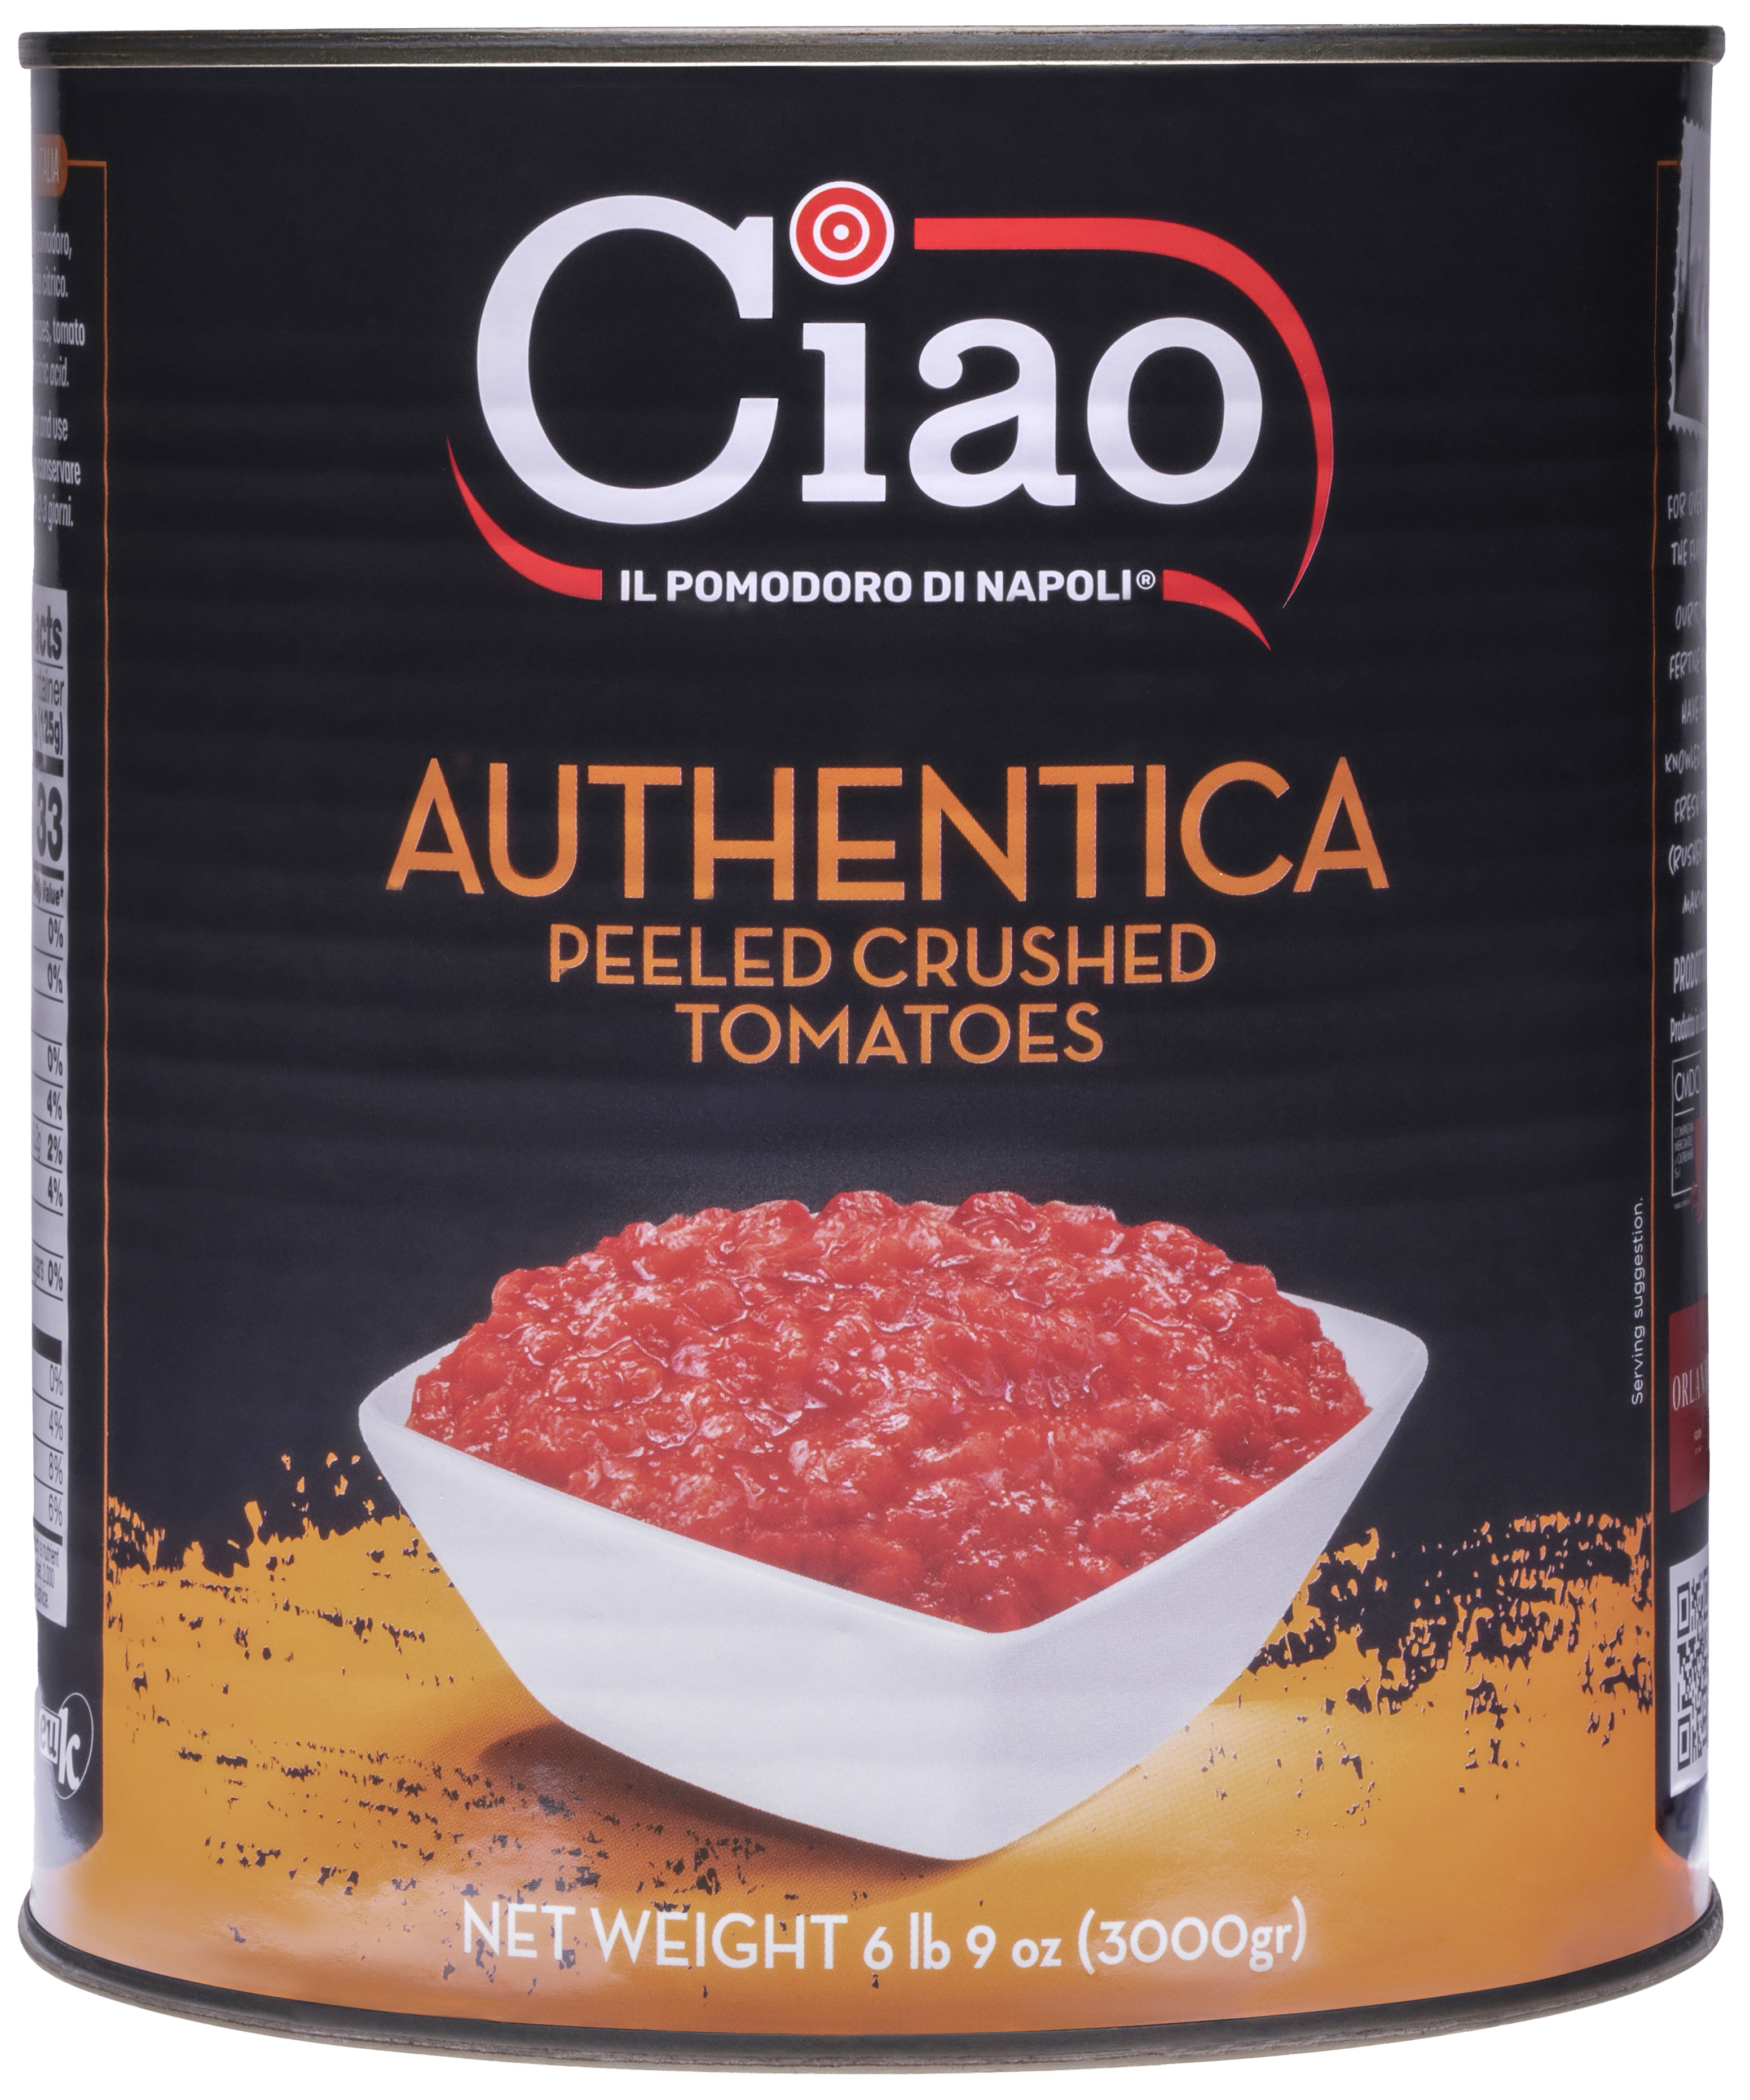 Authentica Crushed Tomatoes